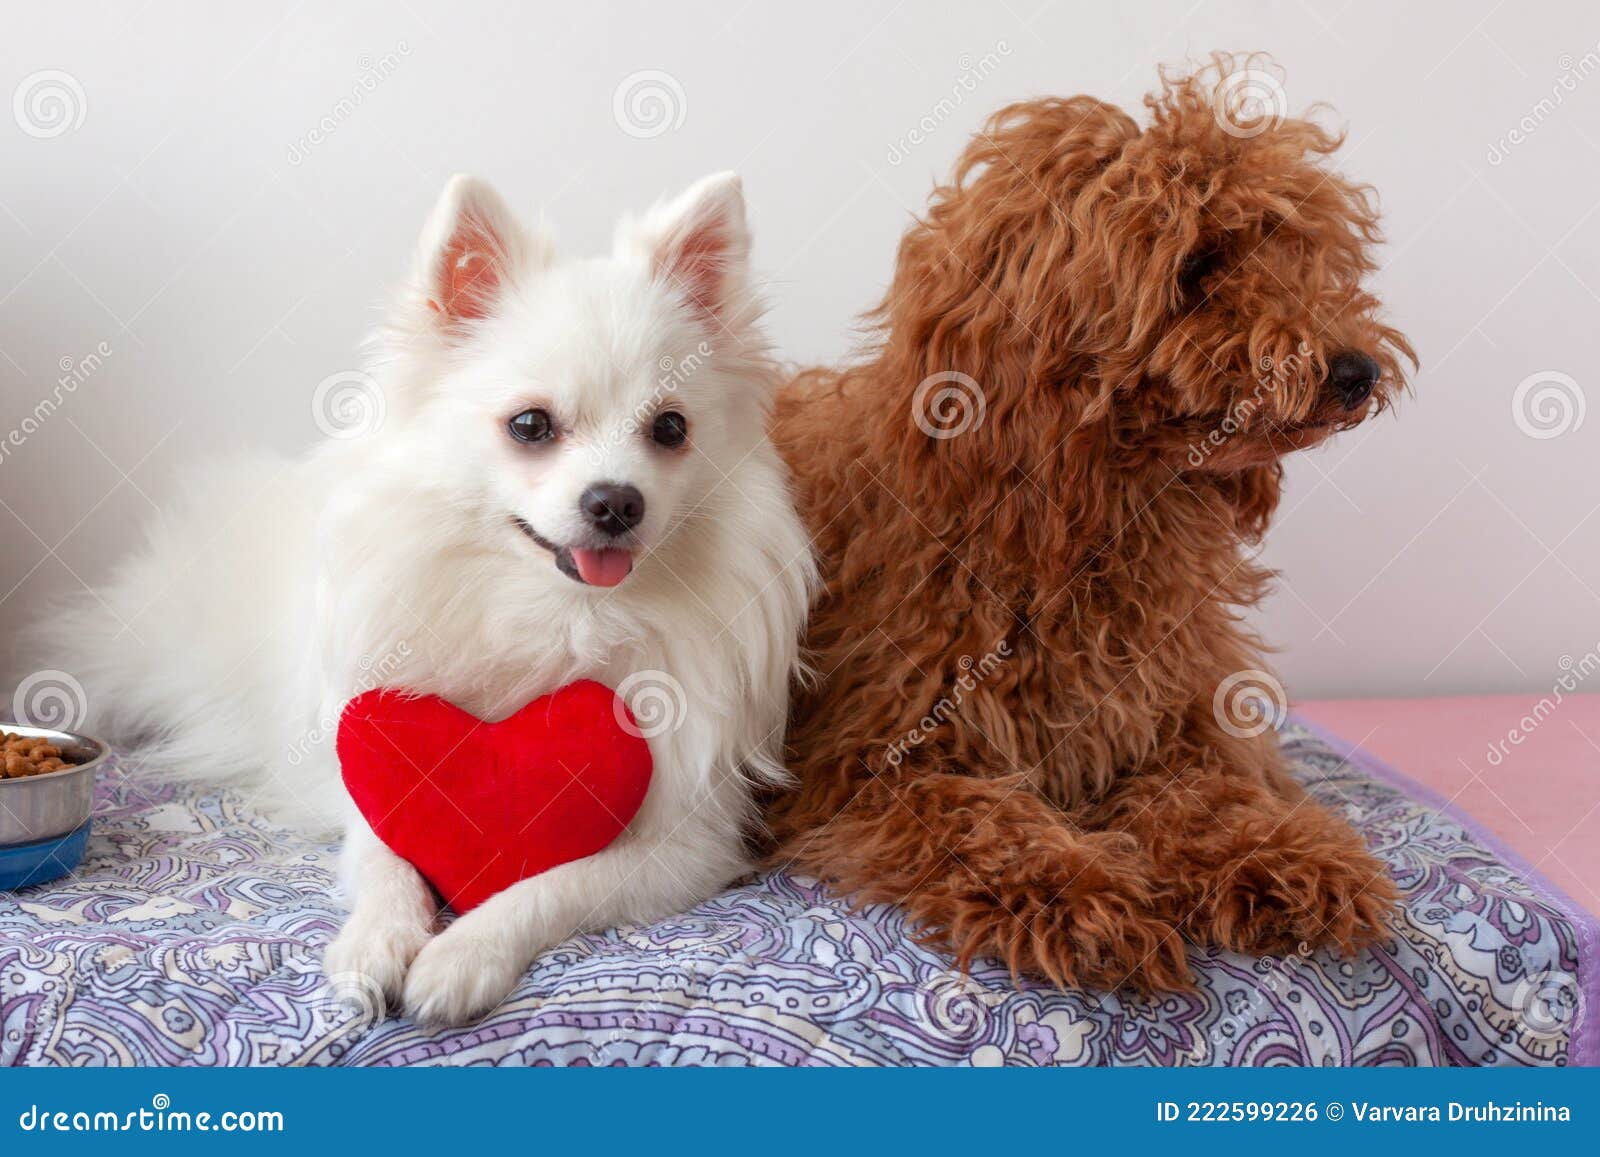 Two Small Dogs, White Pomeranian and Red Brown Miniature Poodle, are Lying  on Litter. a White Dog Holds a Red Toy Heart Stock Photo - Image of white,  health: 222599226